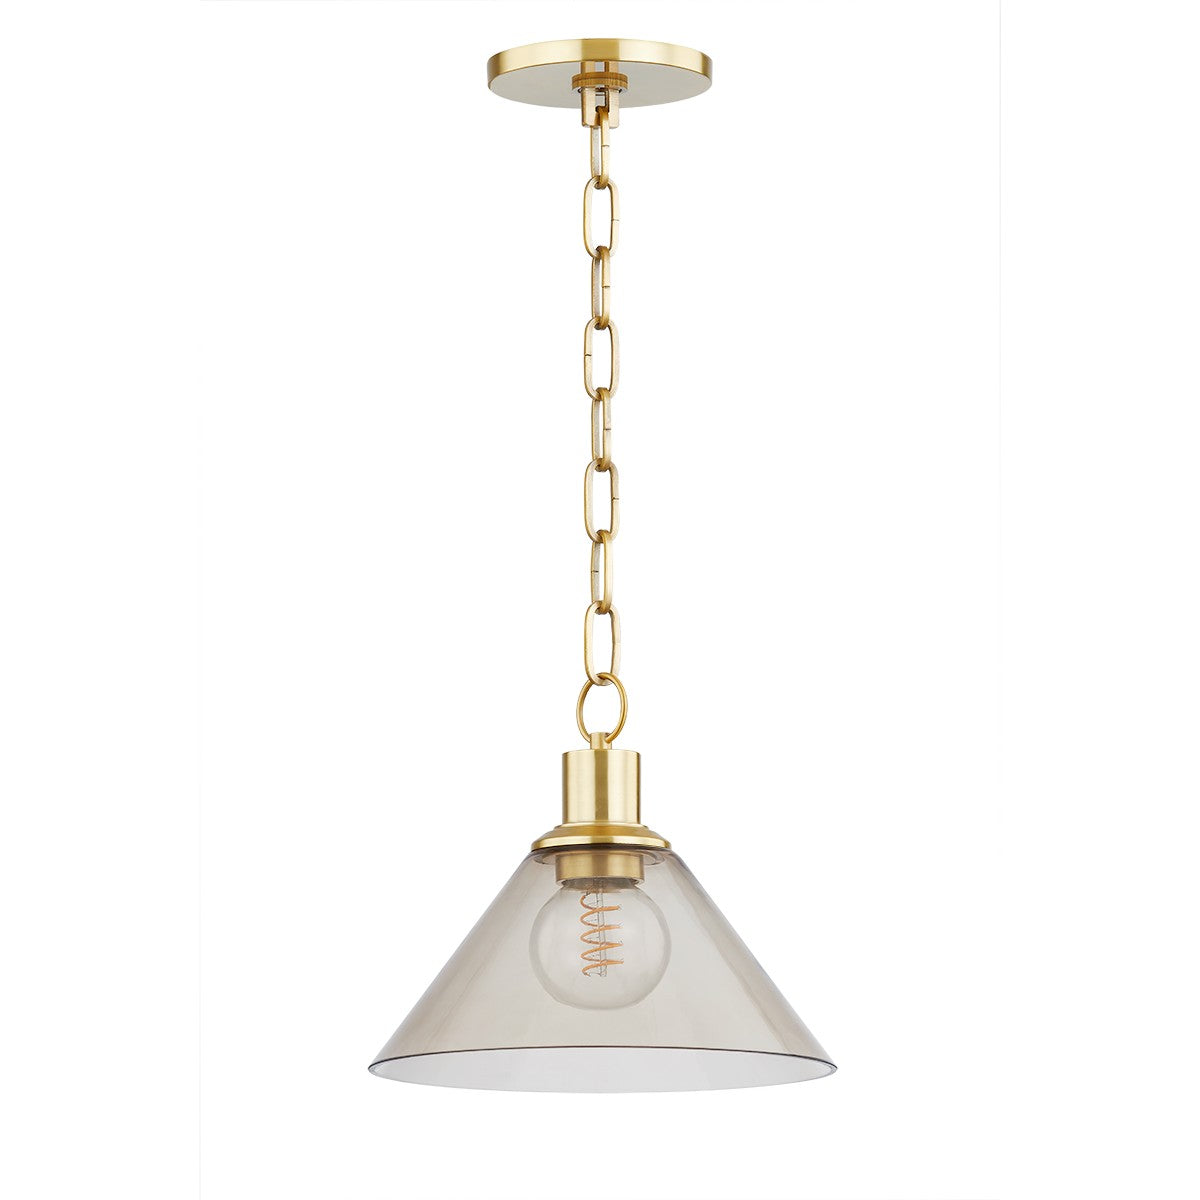 Mitzi - H829701S-AGB - One Light Pendant - Anniebee - Aged Brass